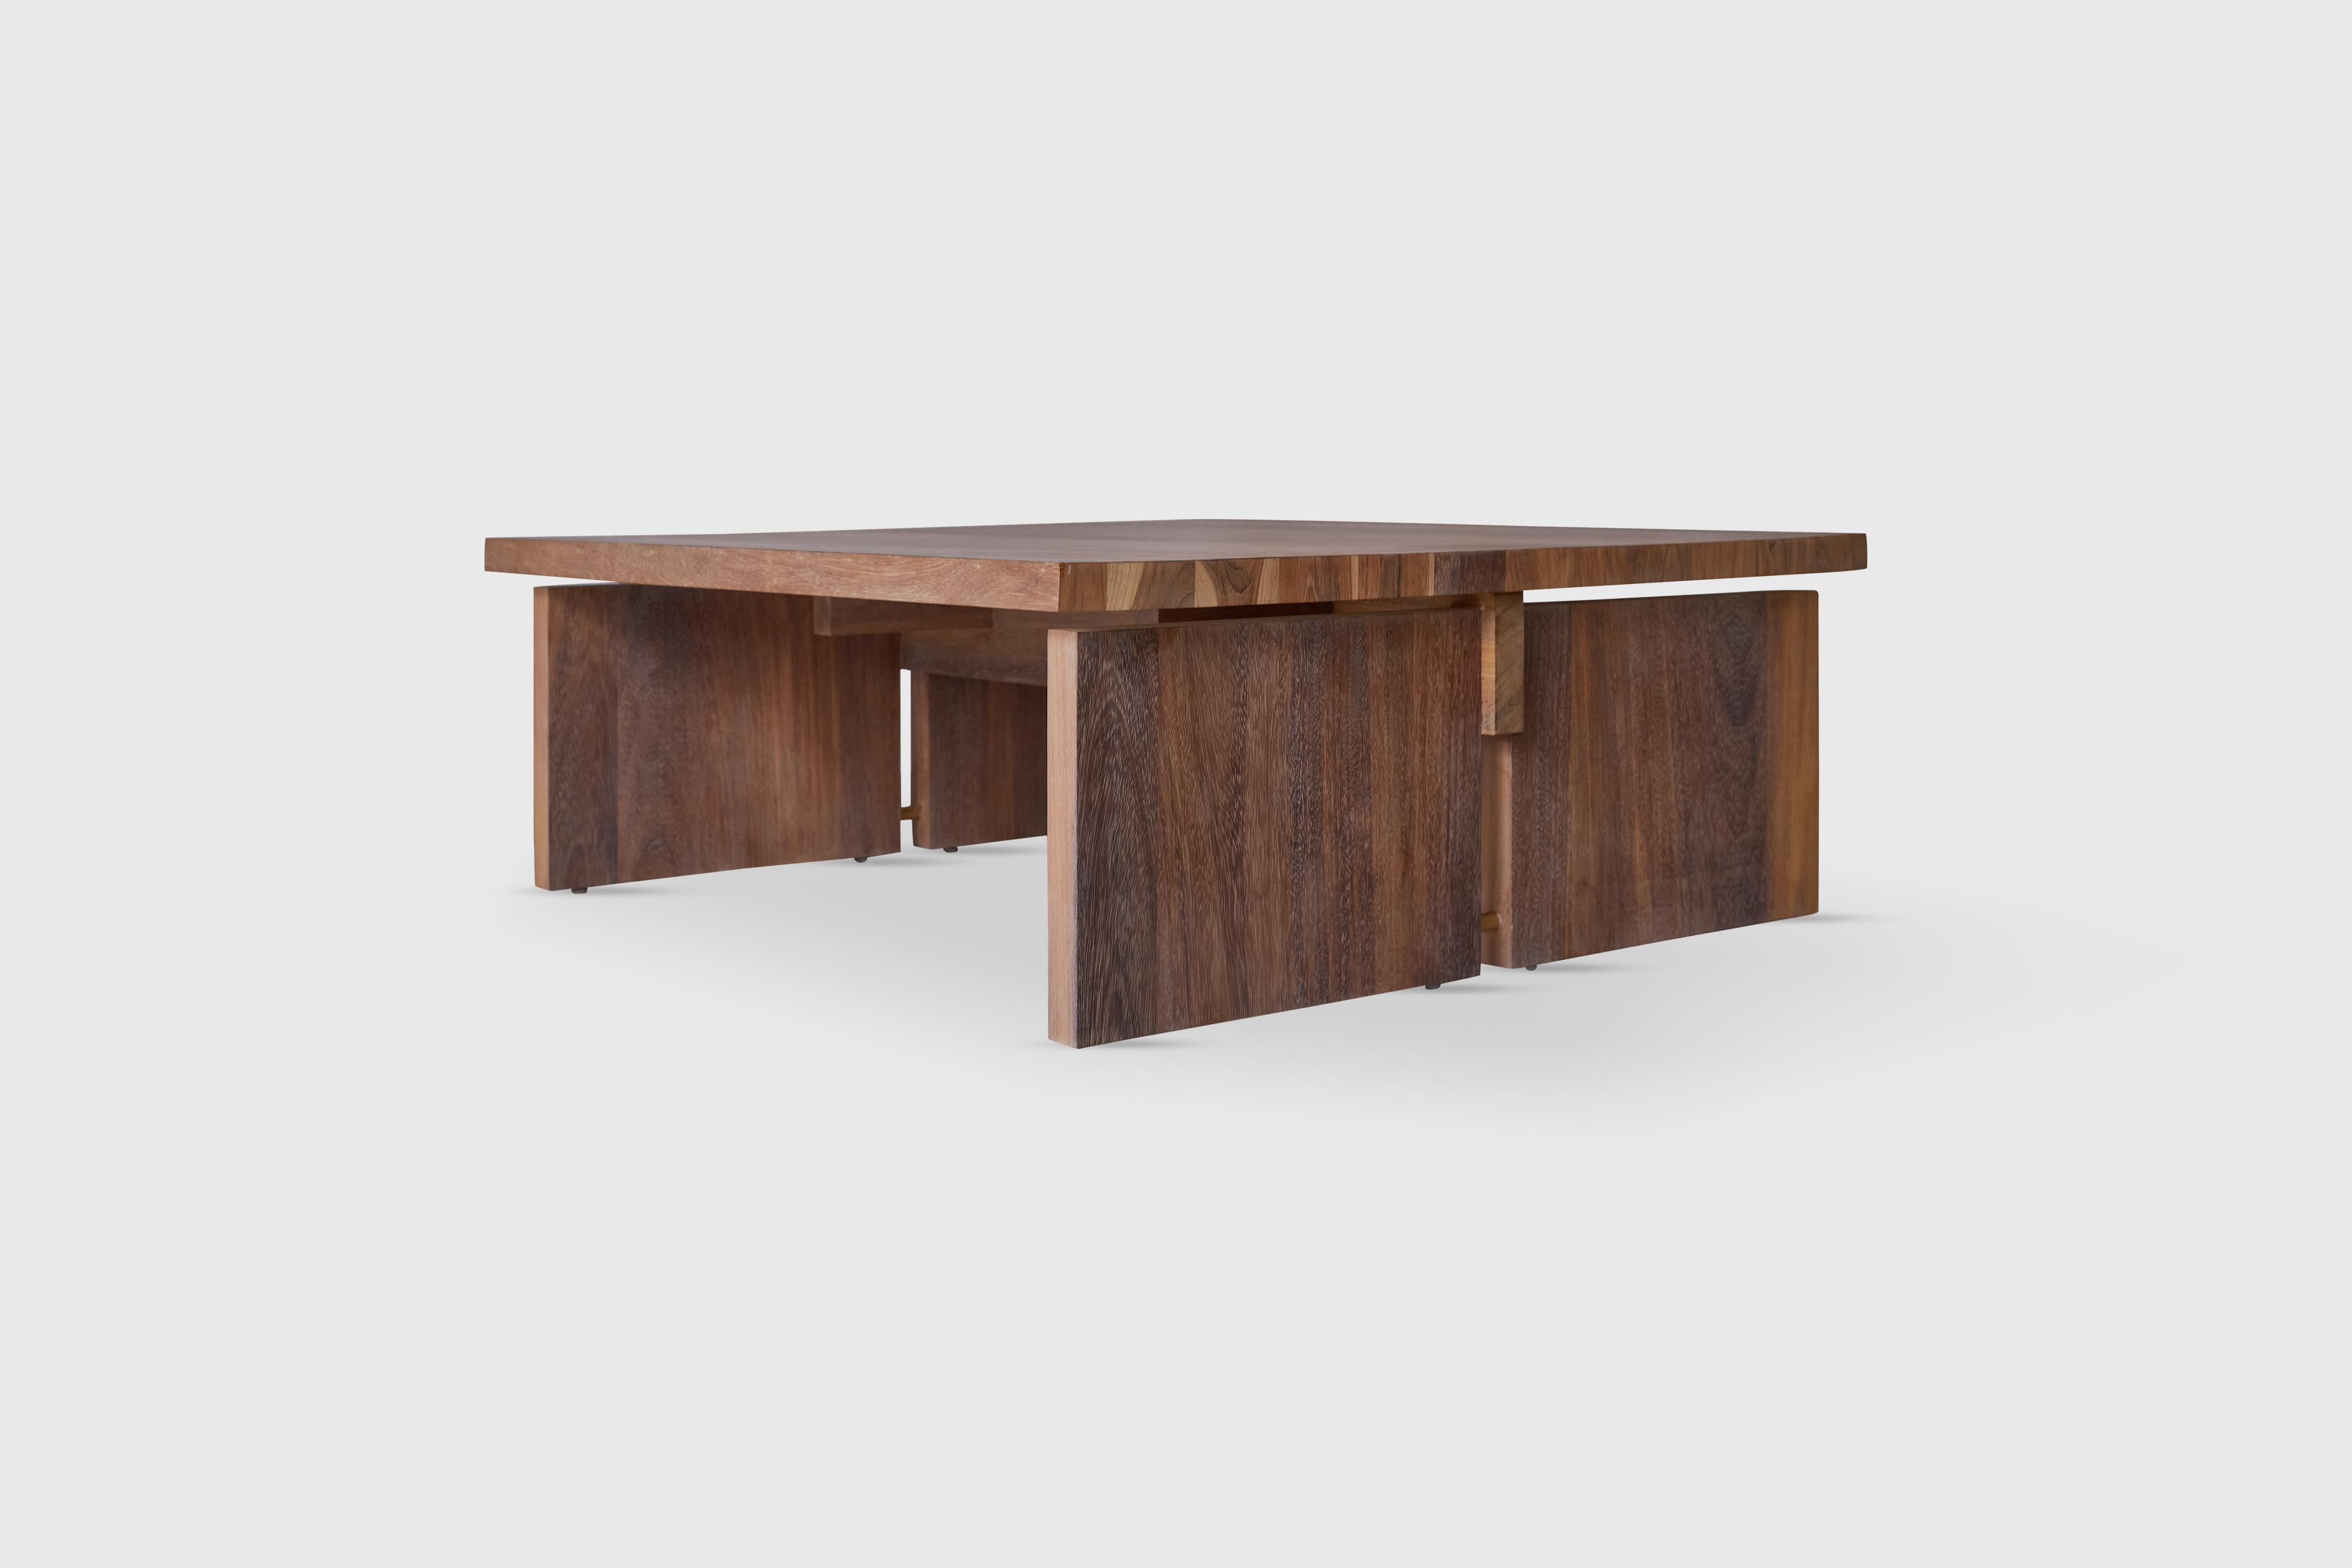 Carl coffee table by Atra Design
Dimensions: D 140 x W 120 x H 44 cm
Materials: walnut wood, brass

Atra Design
We are Atra, a furniture brand produced by Atra form a mexico city–based high end production facility that also houses our founder